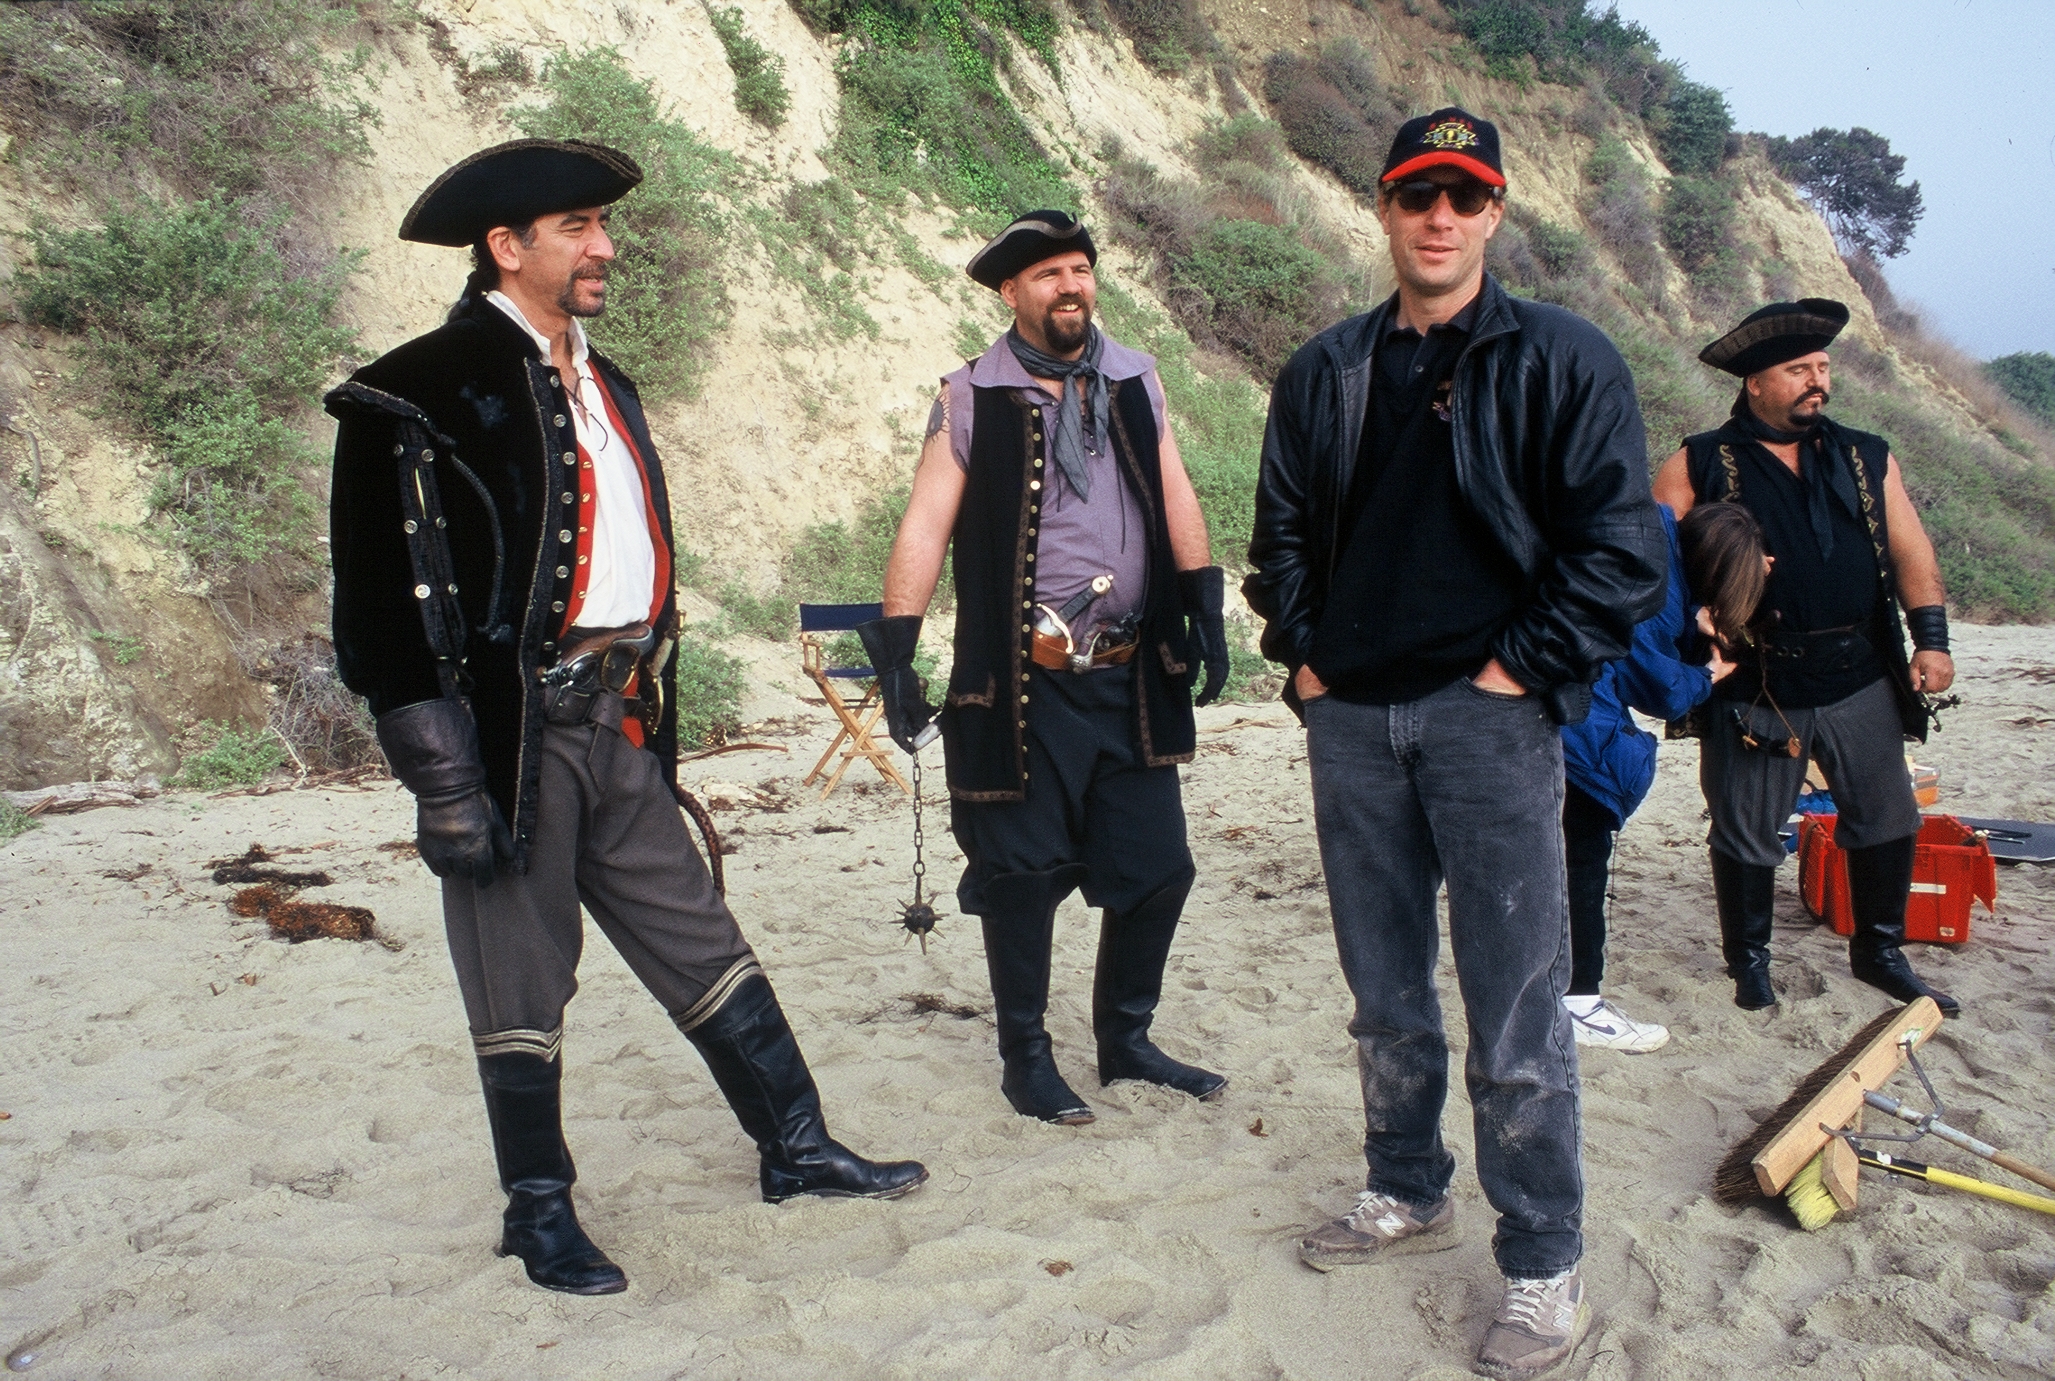 Berris shares a laugh with Michael Gregory and his band of Pirates on a beach location.